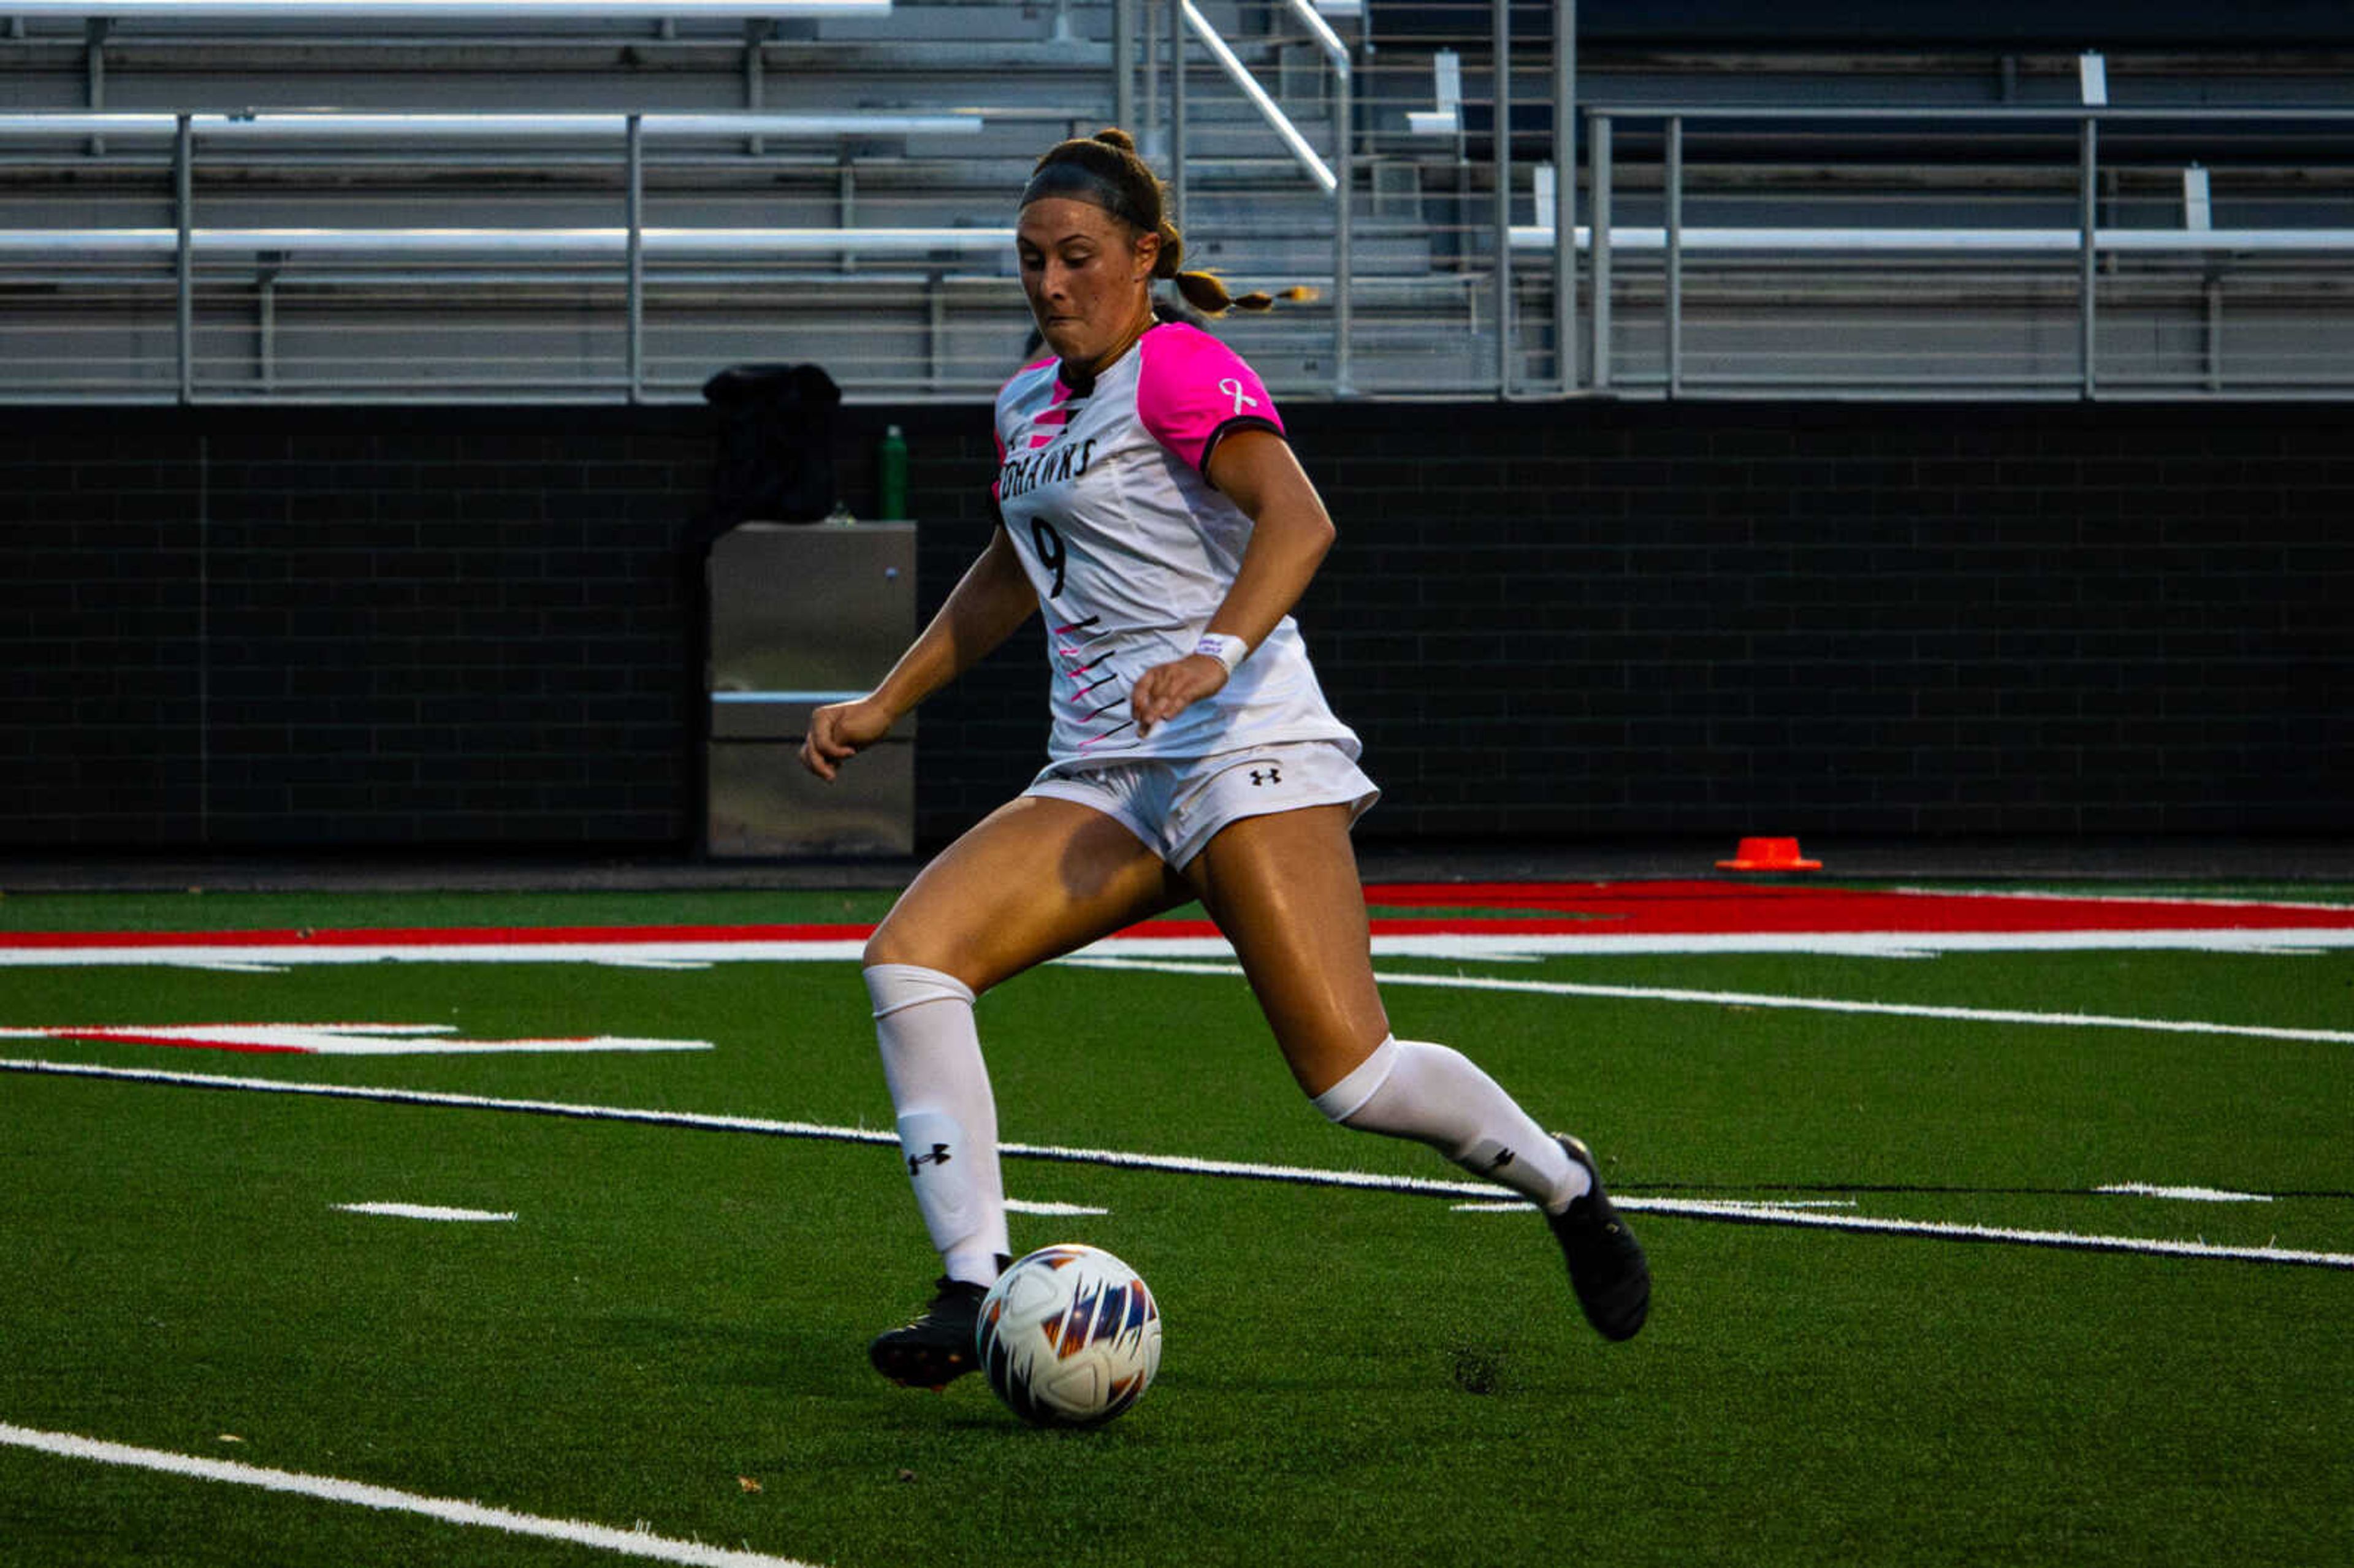 Sophomore forward Cayla Koerner shoots the ball, and scores against the little rock trojans. Koerner had the lone goal for the Redhawks.